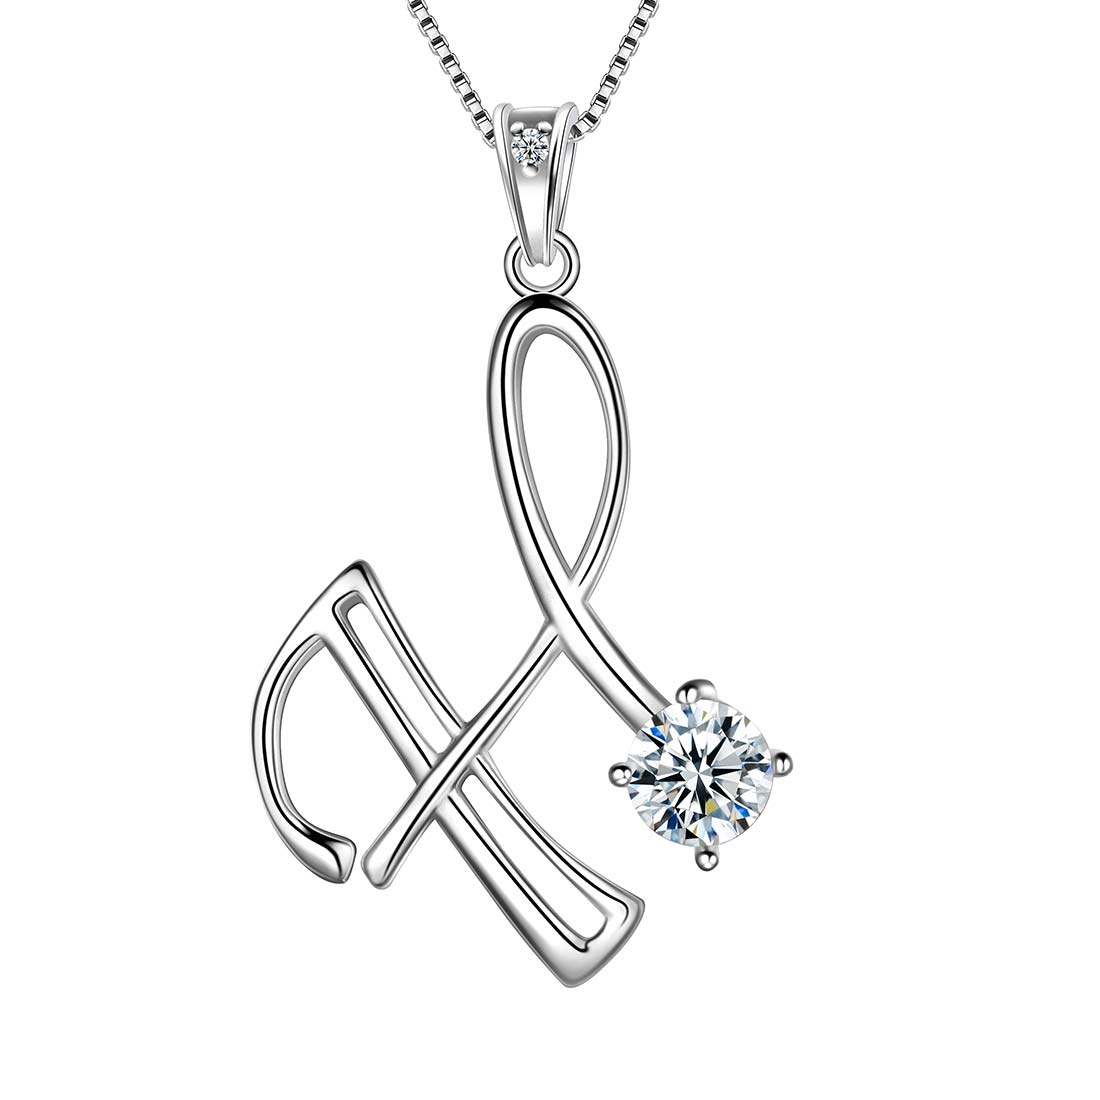 Women Letter H Initial Necklaces Sterling Silver - Necklaces - Aurora Tears Jewelry